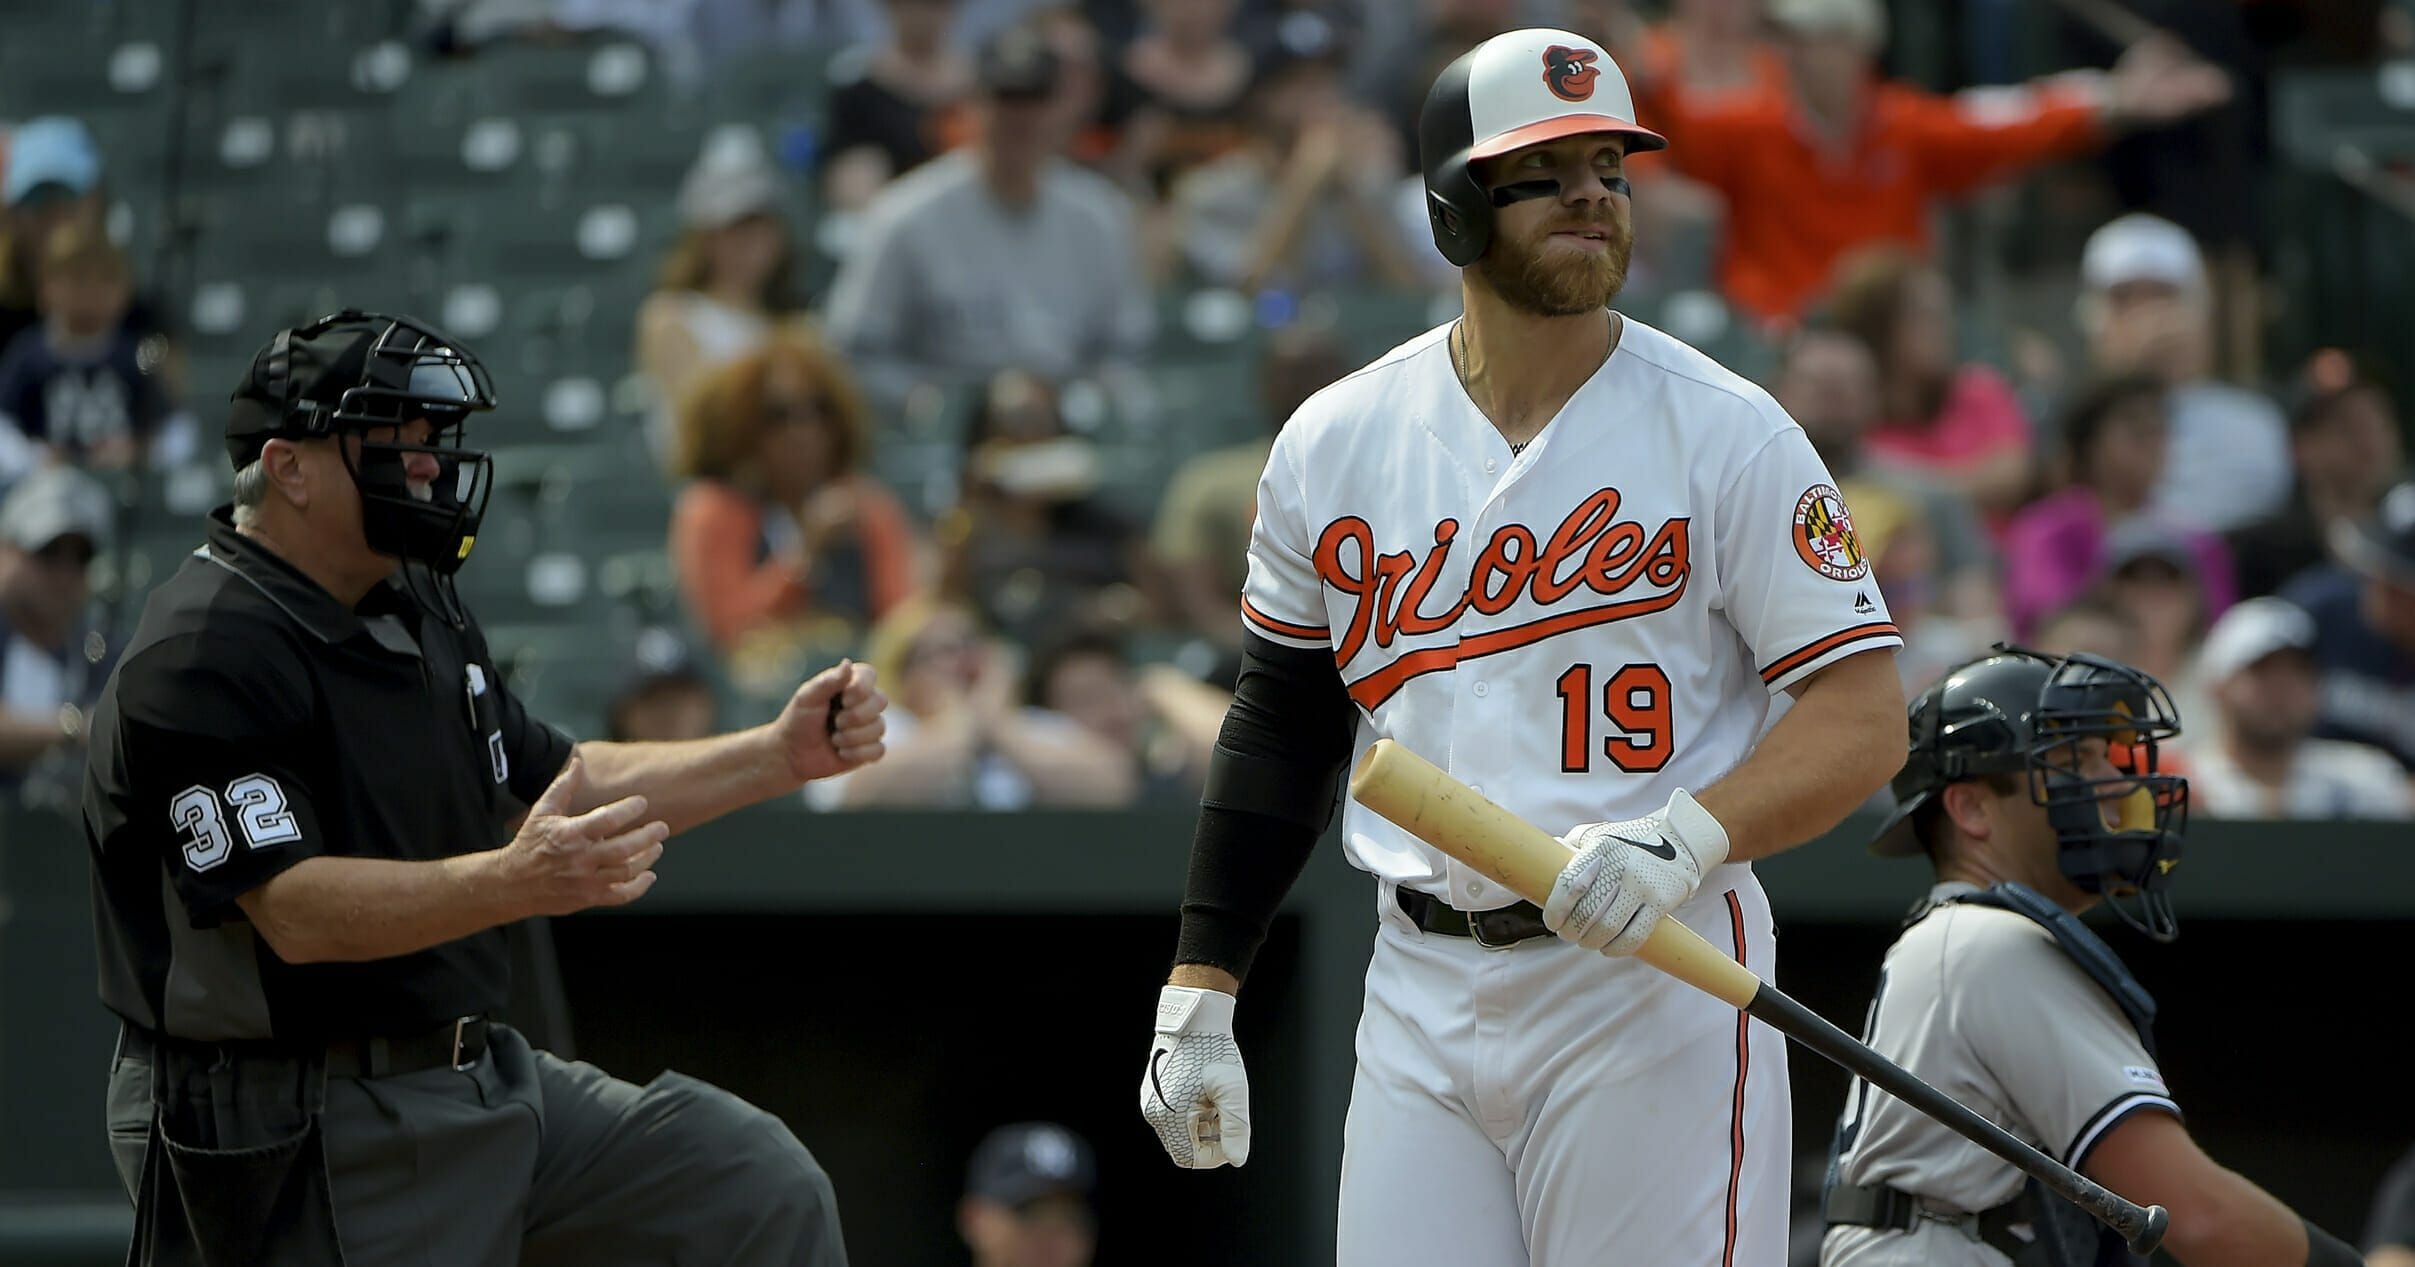 Baltimore Orioles first baseman Chris Davis reacts after striking out in the seventh inning of a baseball game against the New York Yankees, Sunday, April 7, 2019, in Baltimore.